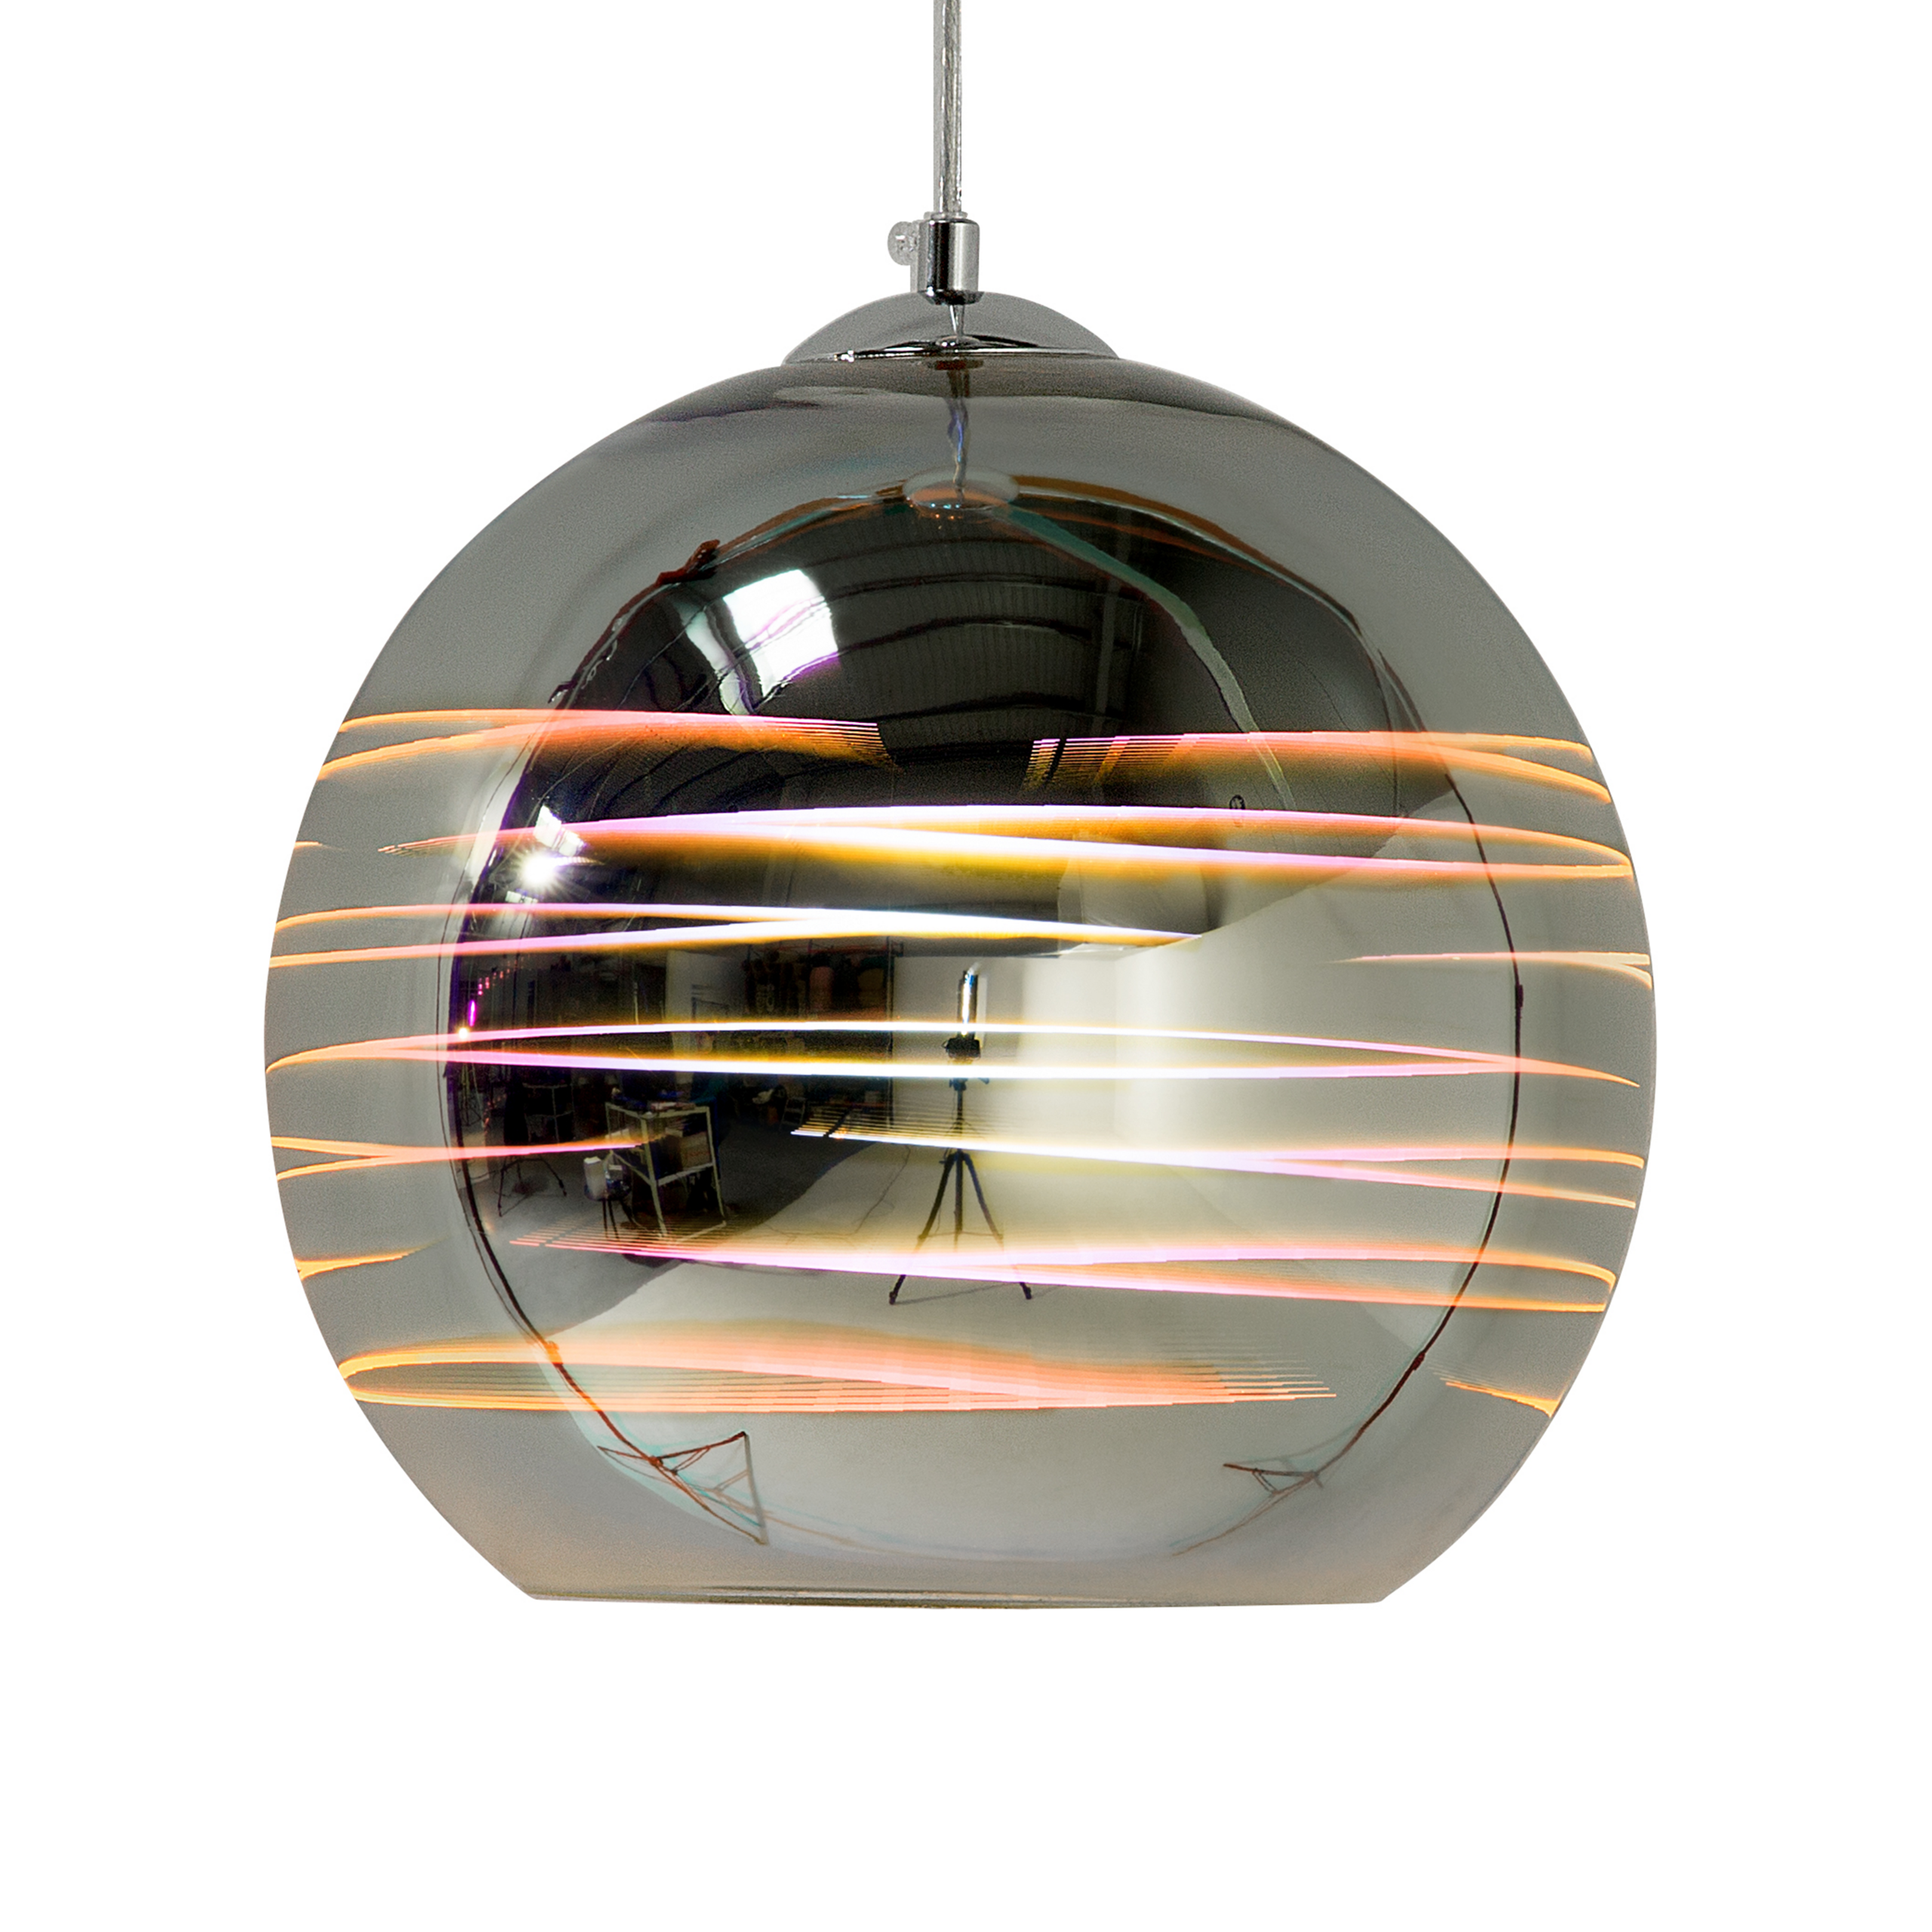 Beliani Hanging Light Pendant Lamp Silver Highly Glossy Reflective Glass Ball Shade Eclectic Glamorous Design